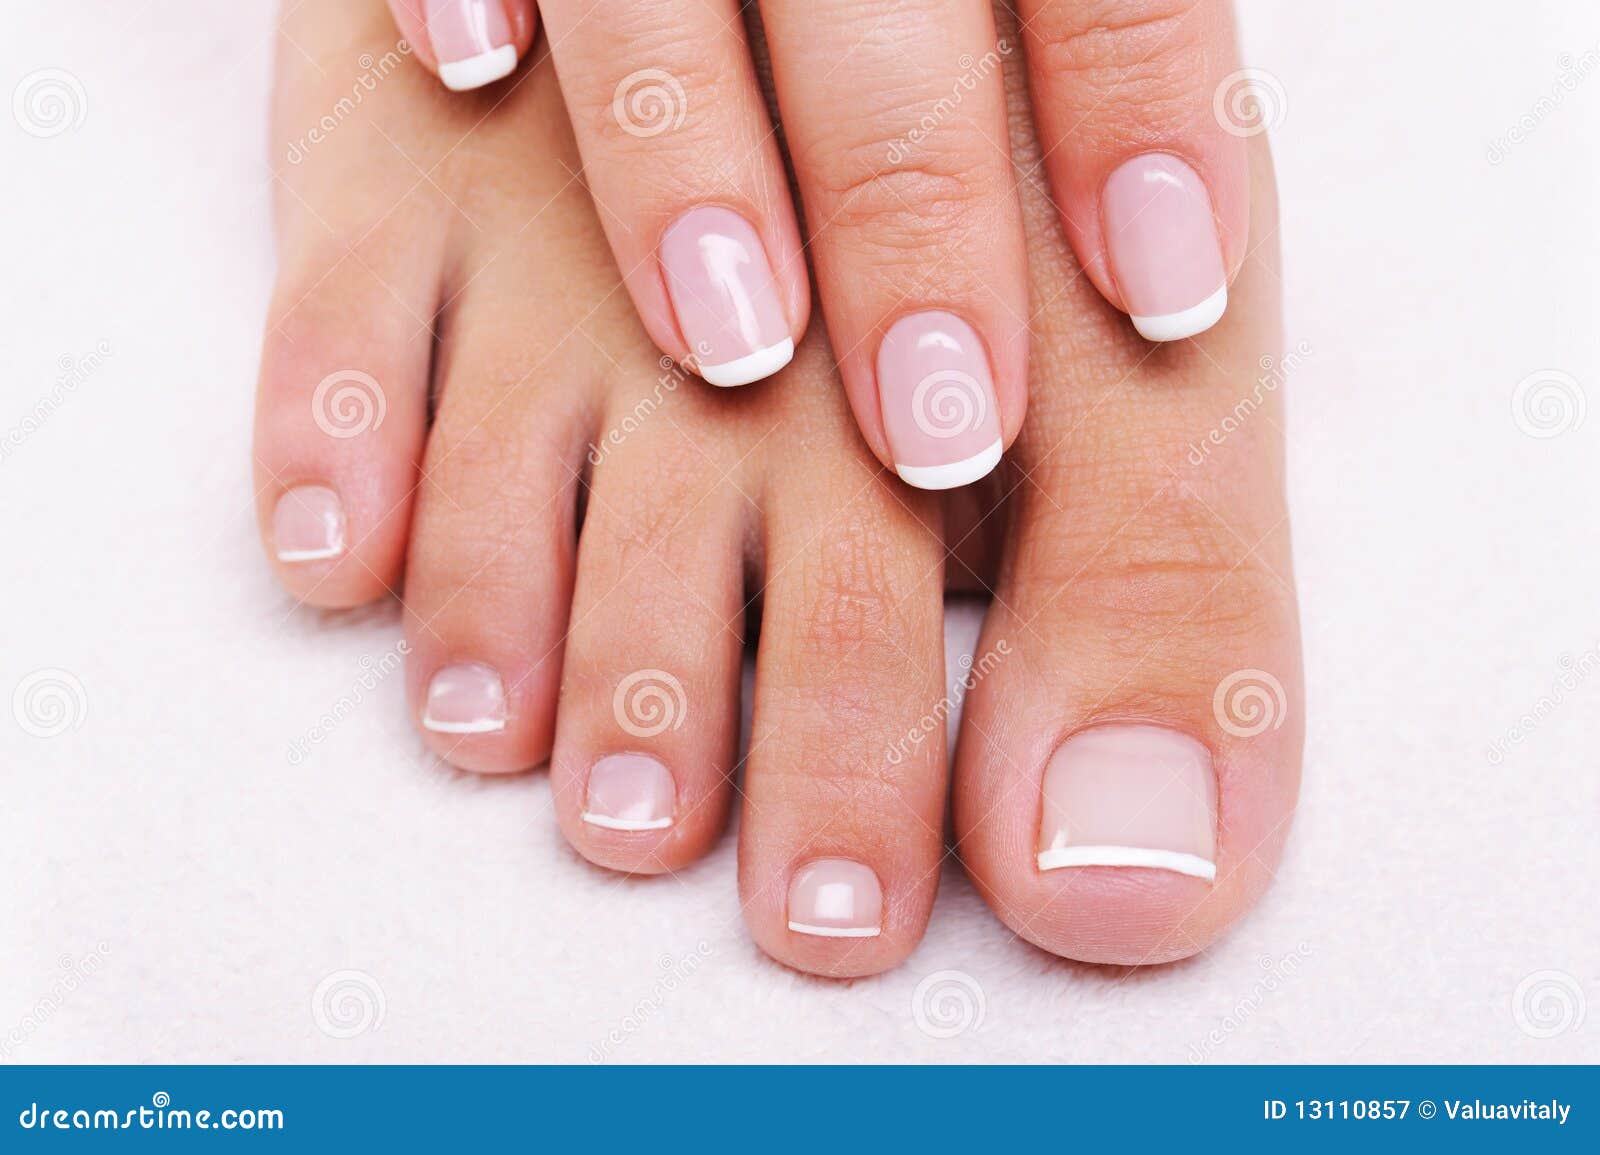 Beauty Nails Of A Female Hand And Feet Stock Image Image Of Woman